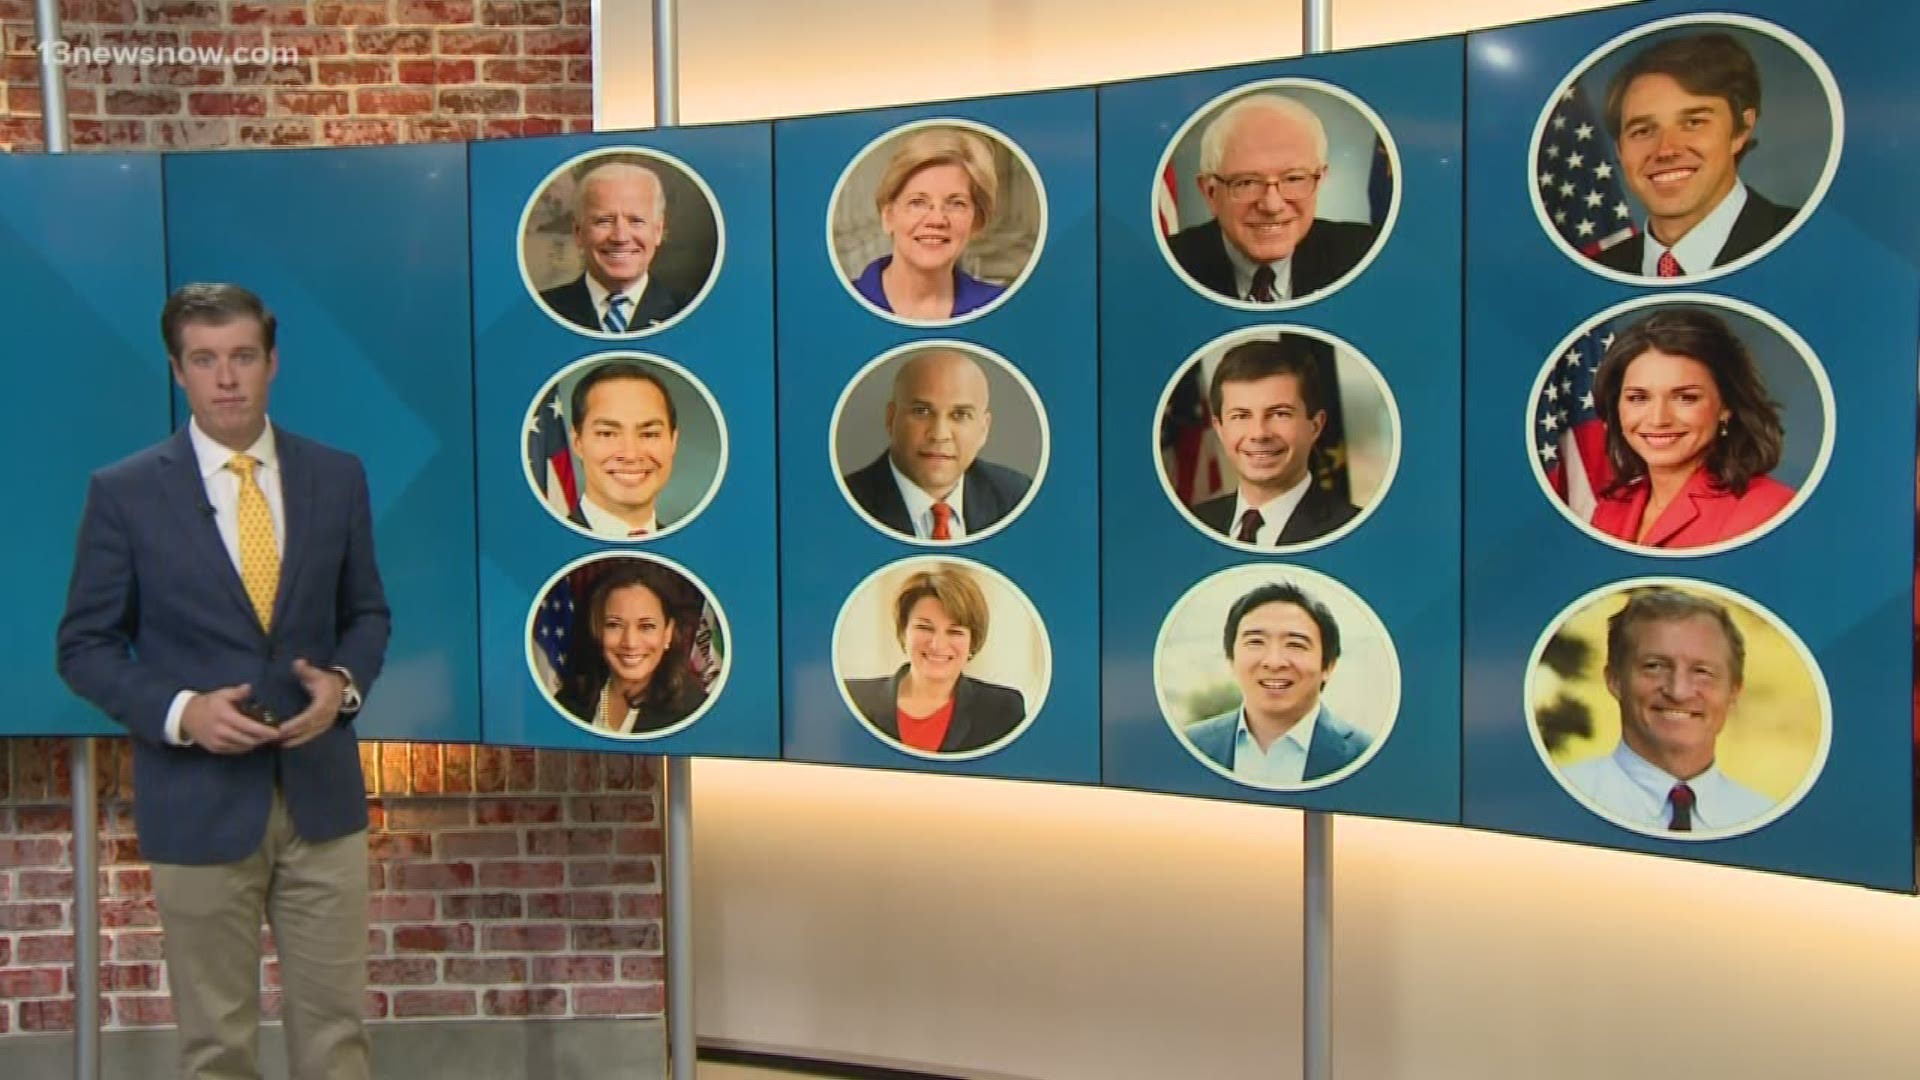 The final 12 candidates are set to appear in the 3rd Democratic Presidential Debate.